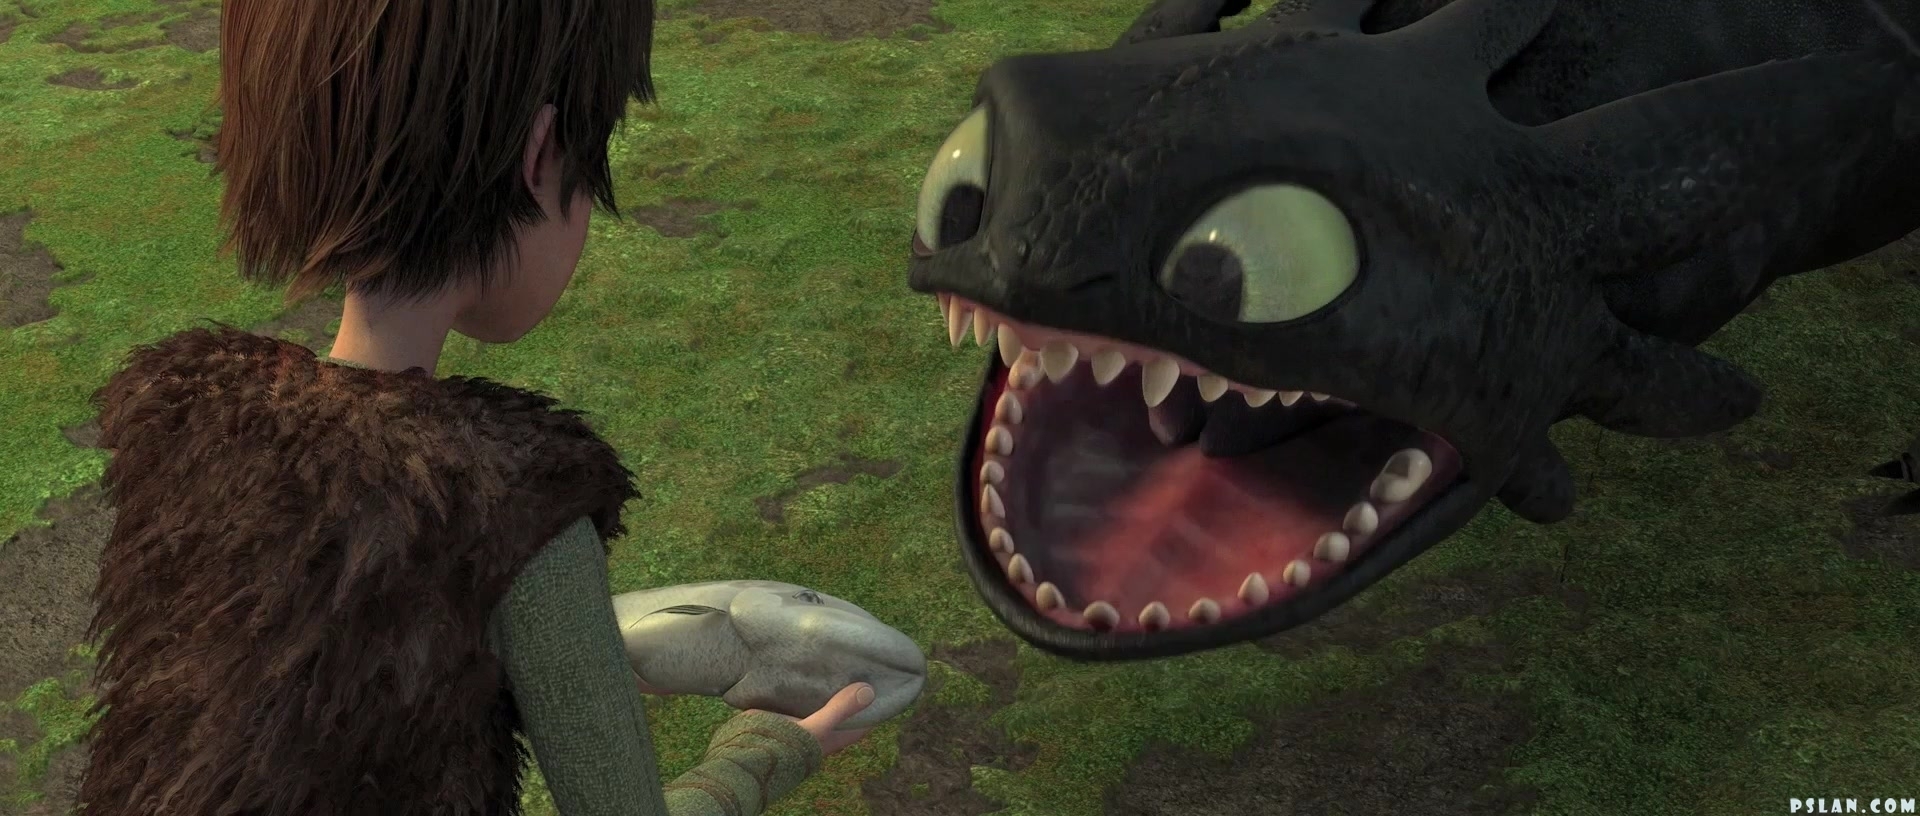 toothless3